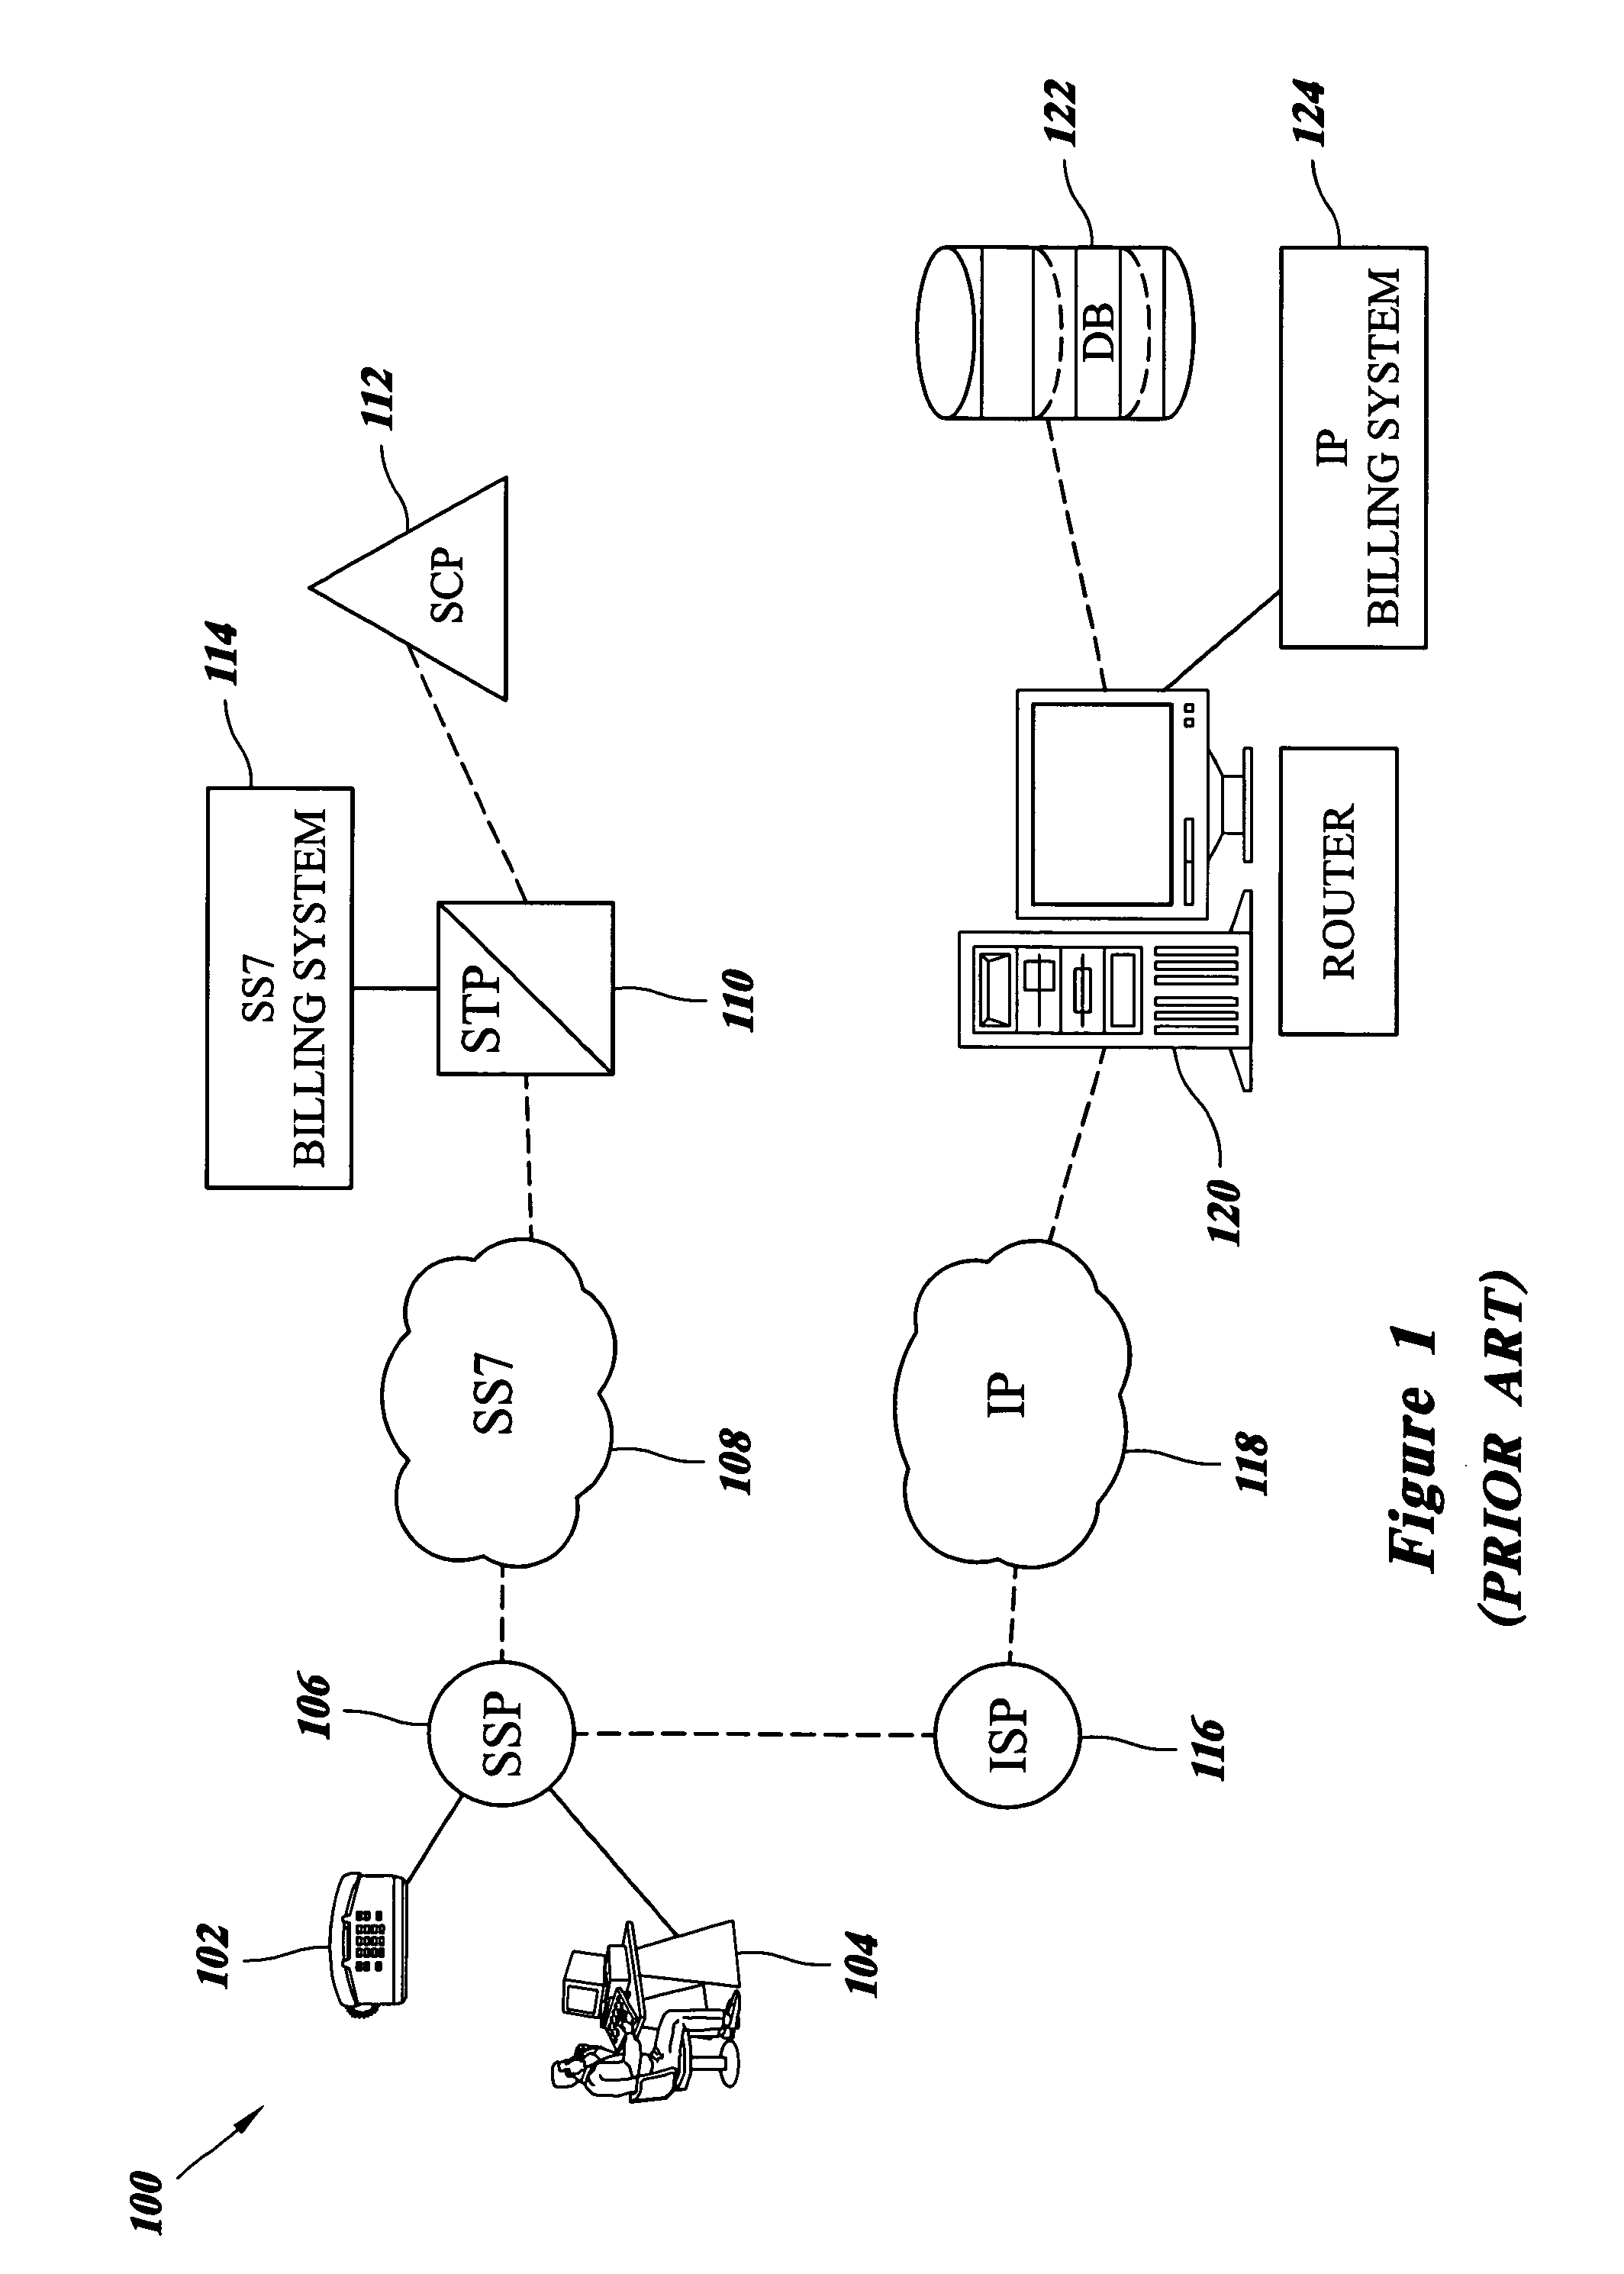 Methods and systems for providing message translation, accounting and routing service in a multi-protocol communications network environment